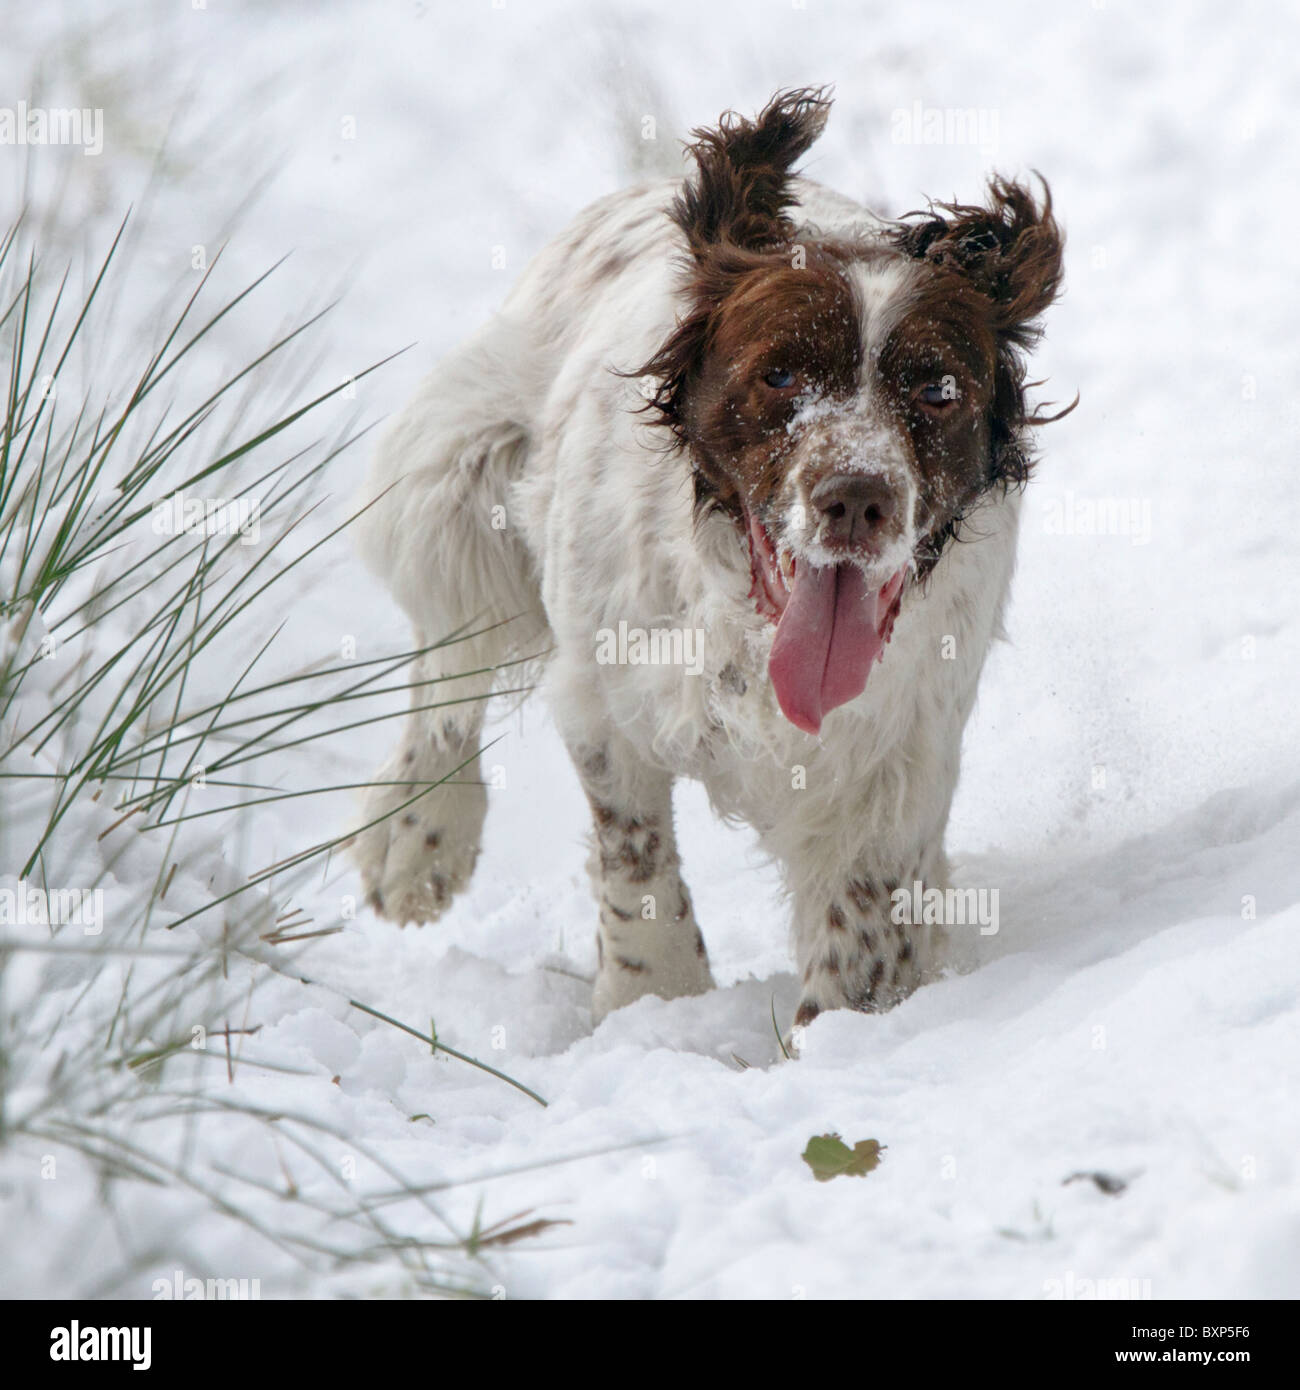 Springer spaniel running through snow, tongue haning out Stock Photo